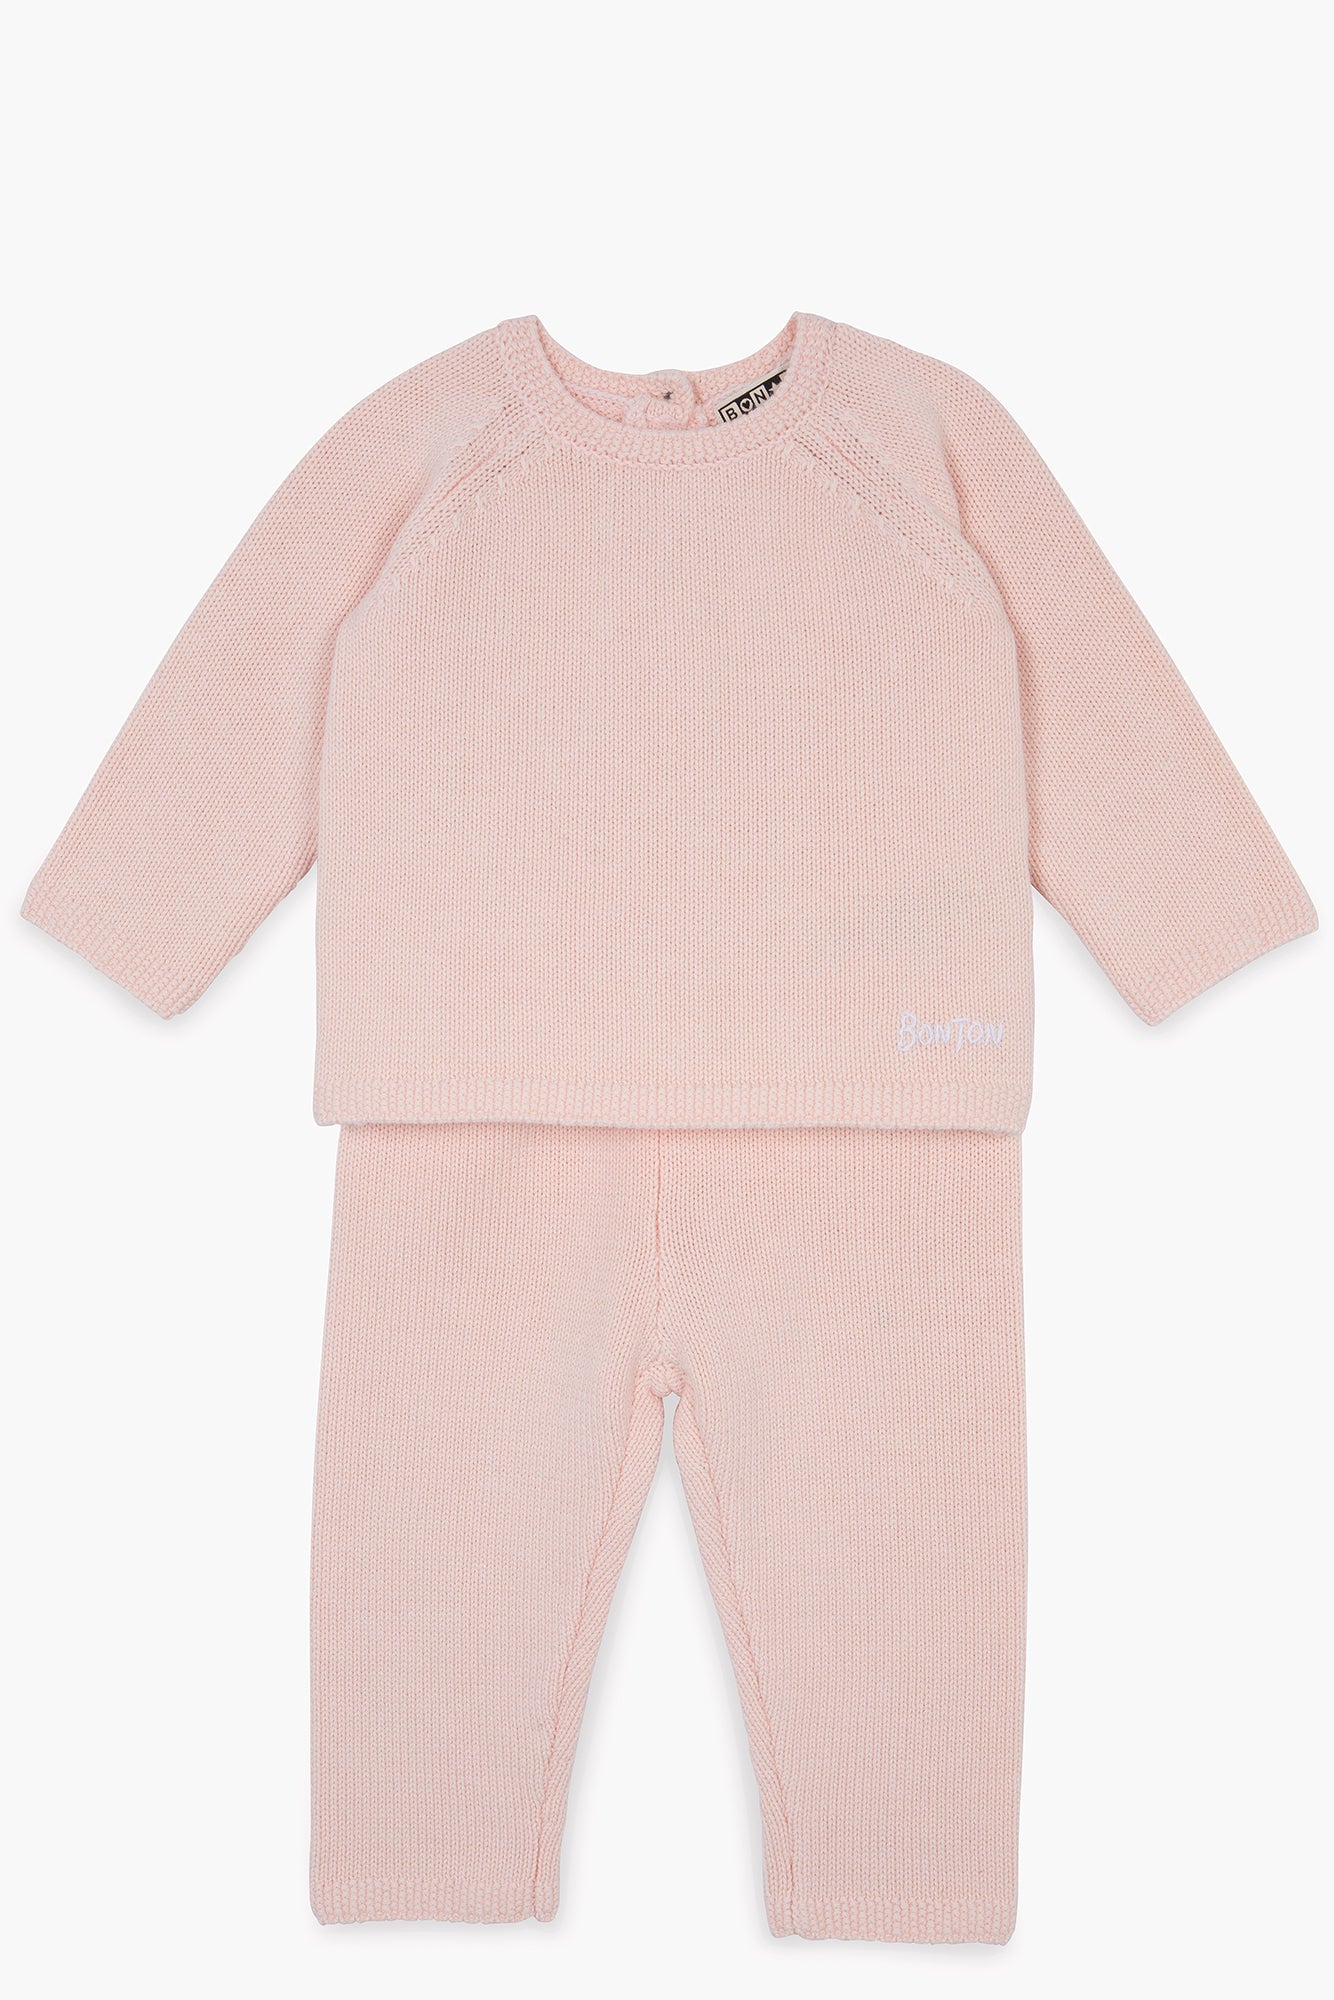 Outfit of Newborn Pink Baby in cotton Cashmere